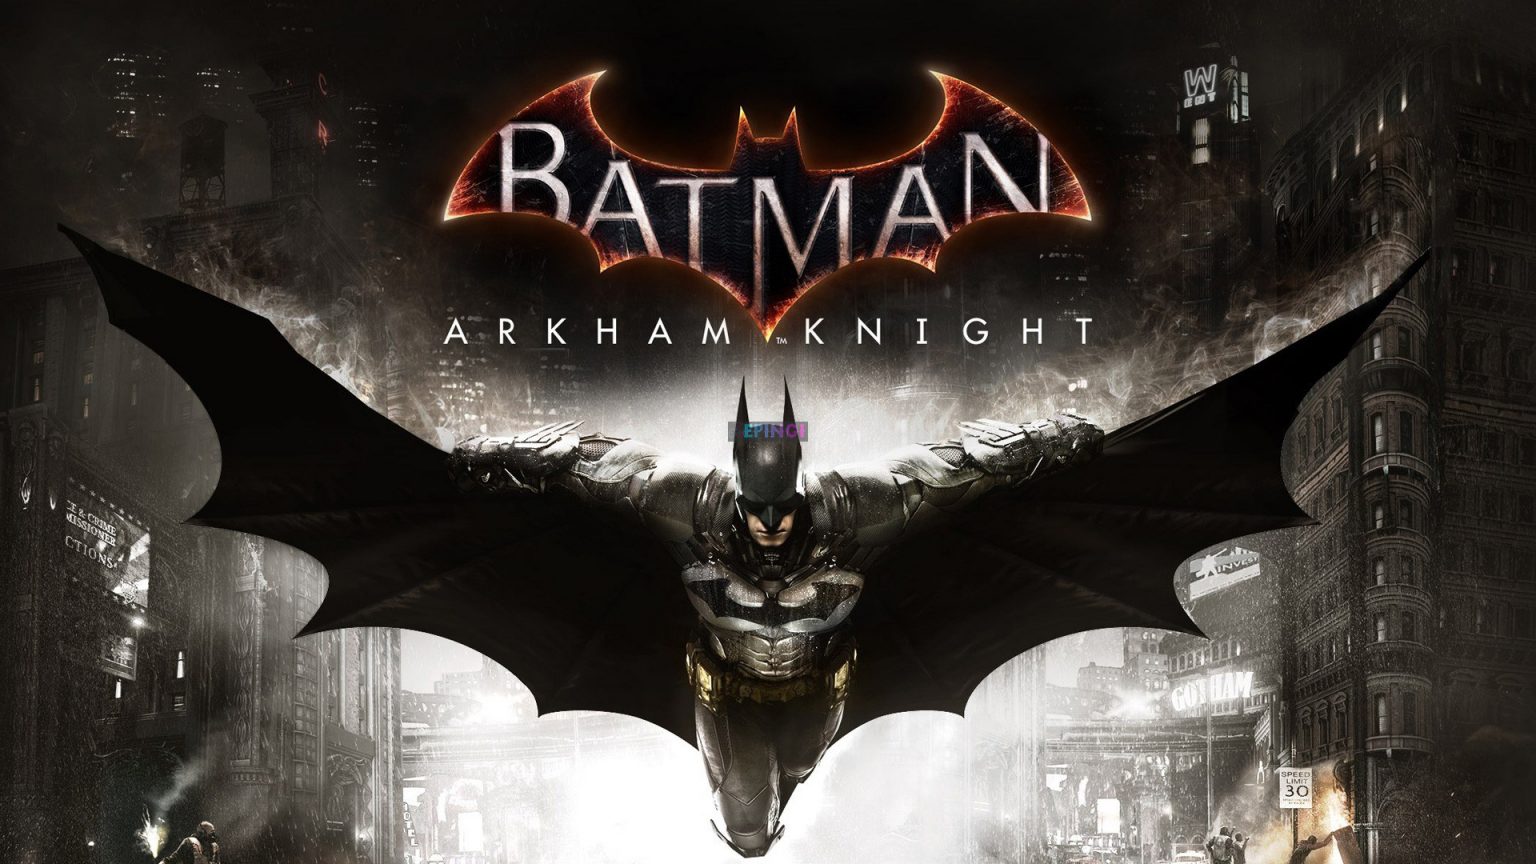 batman pc game free download full version highly compressed